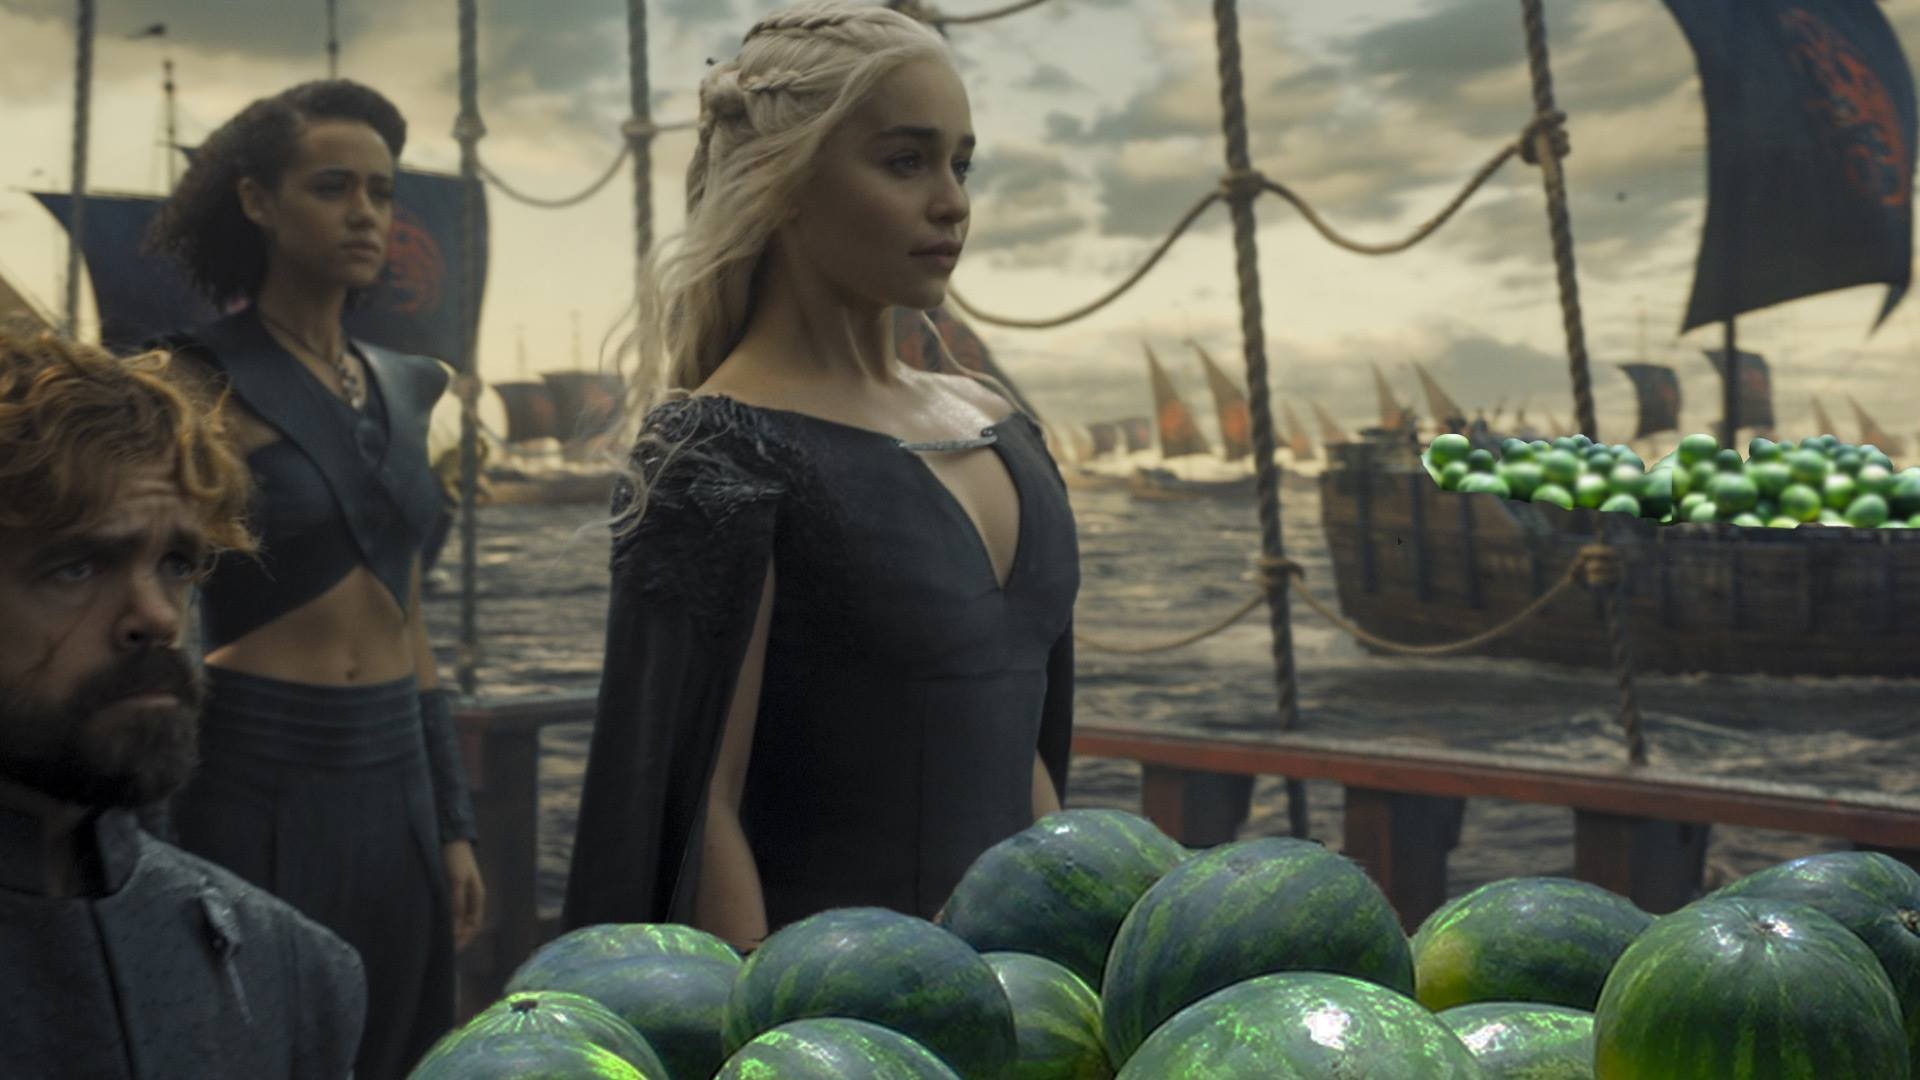 "Watermelons are coming!" reads the caption to the meme, users created from the Game of Thrones TV series scene, where Dayenerys Targaryen sails home to Westeros in season six.